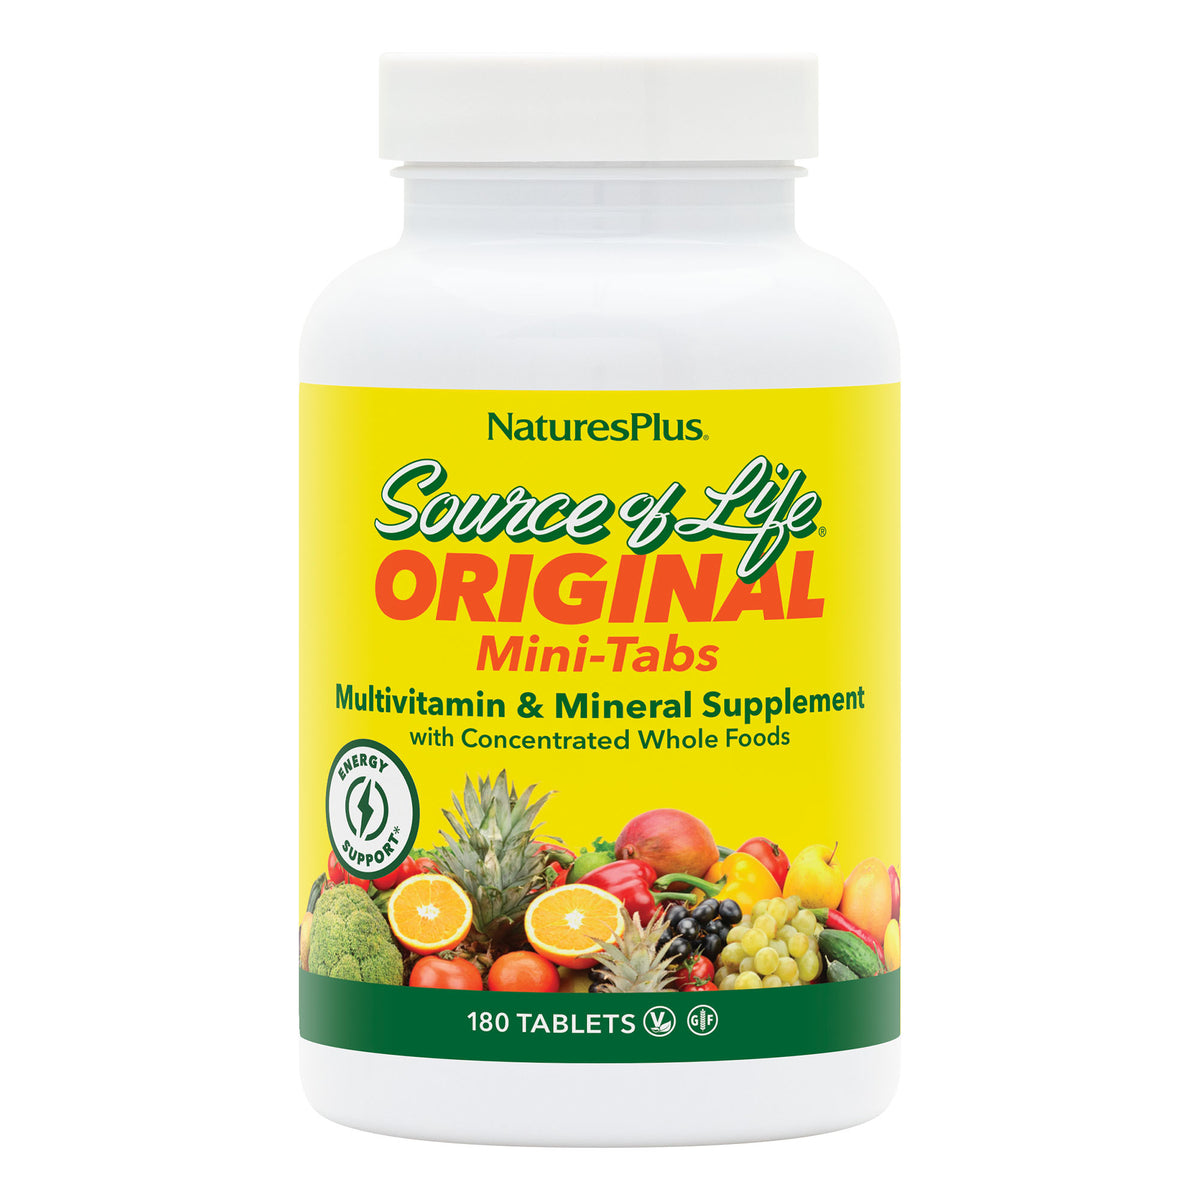 product image of Source of Life® Multivitamin Mini-Tabs containing 180 Count